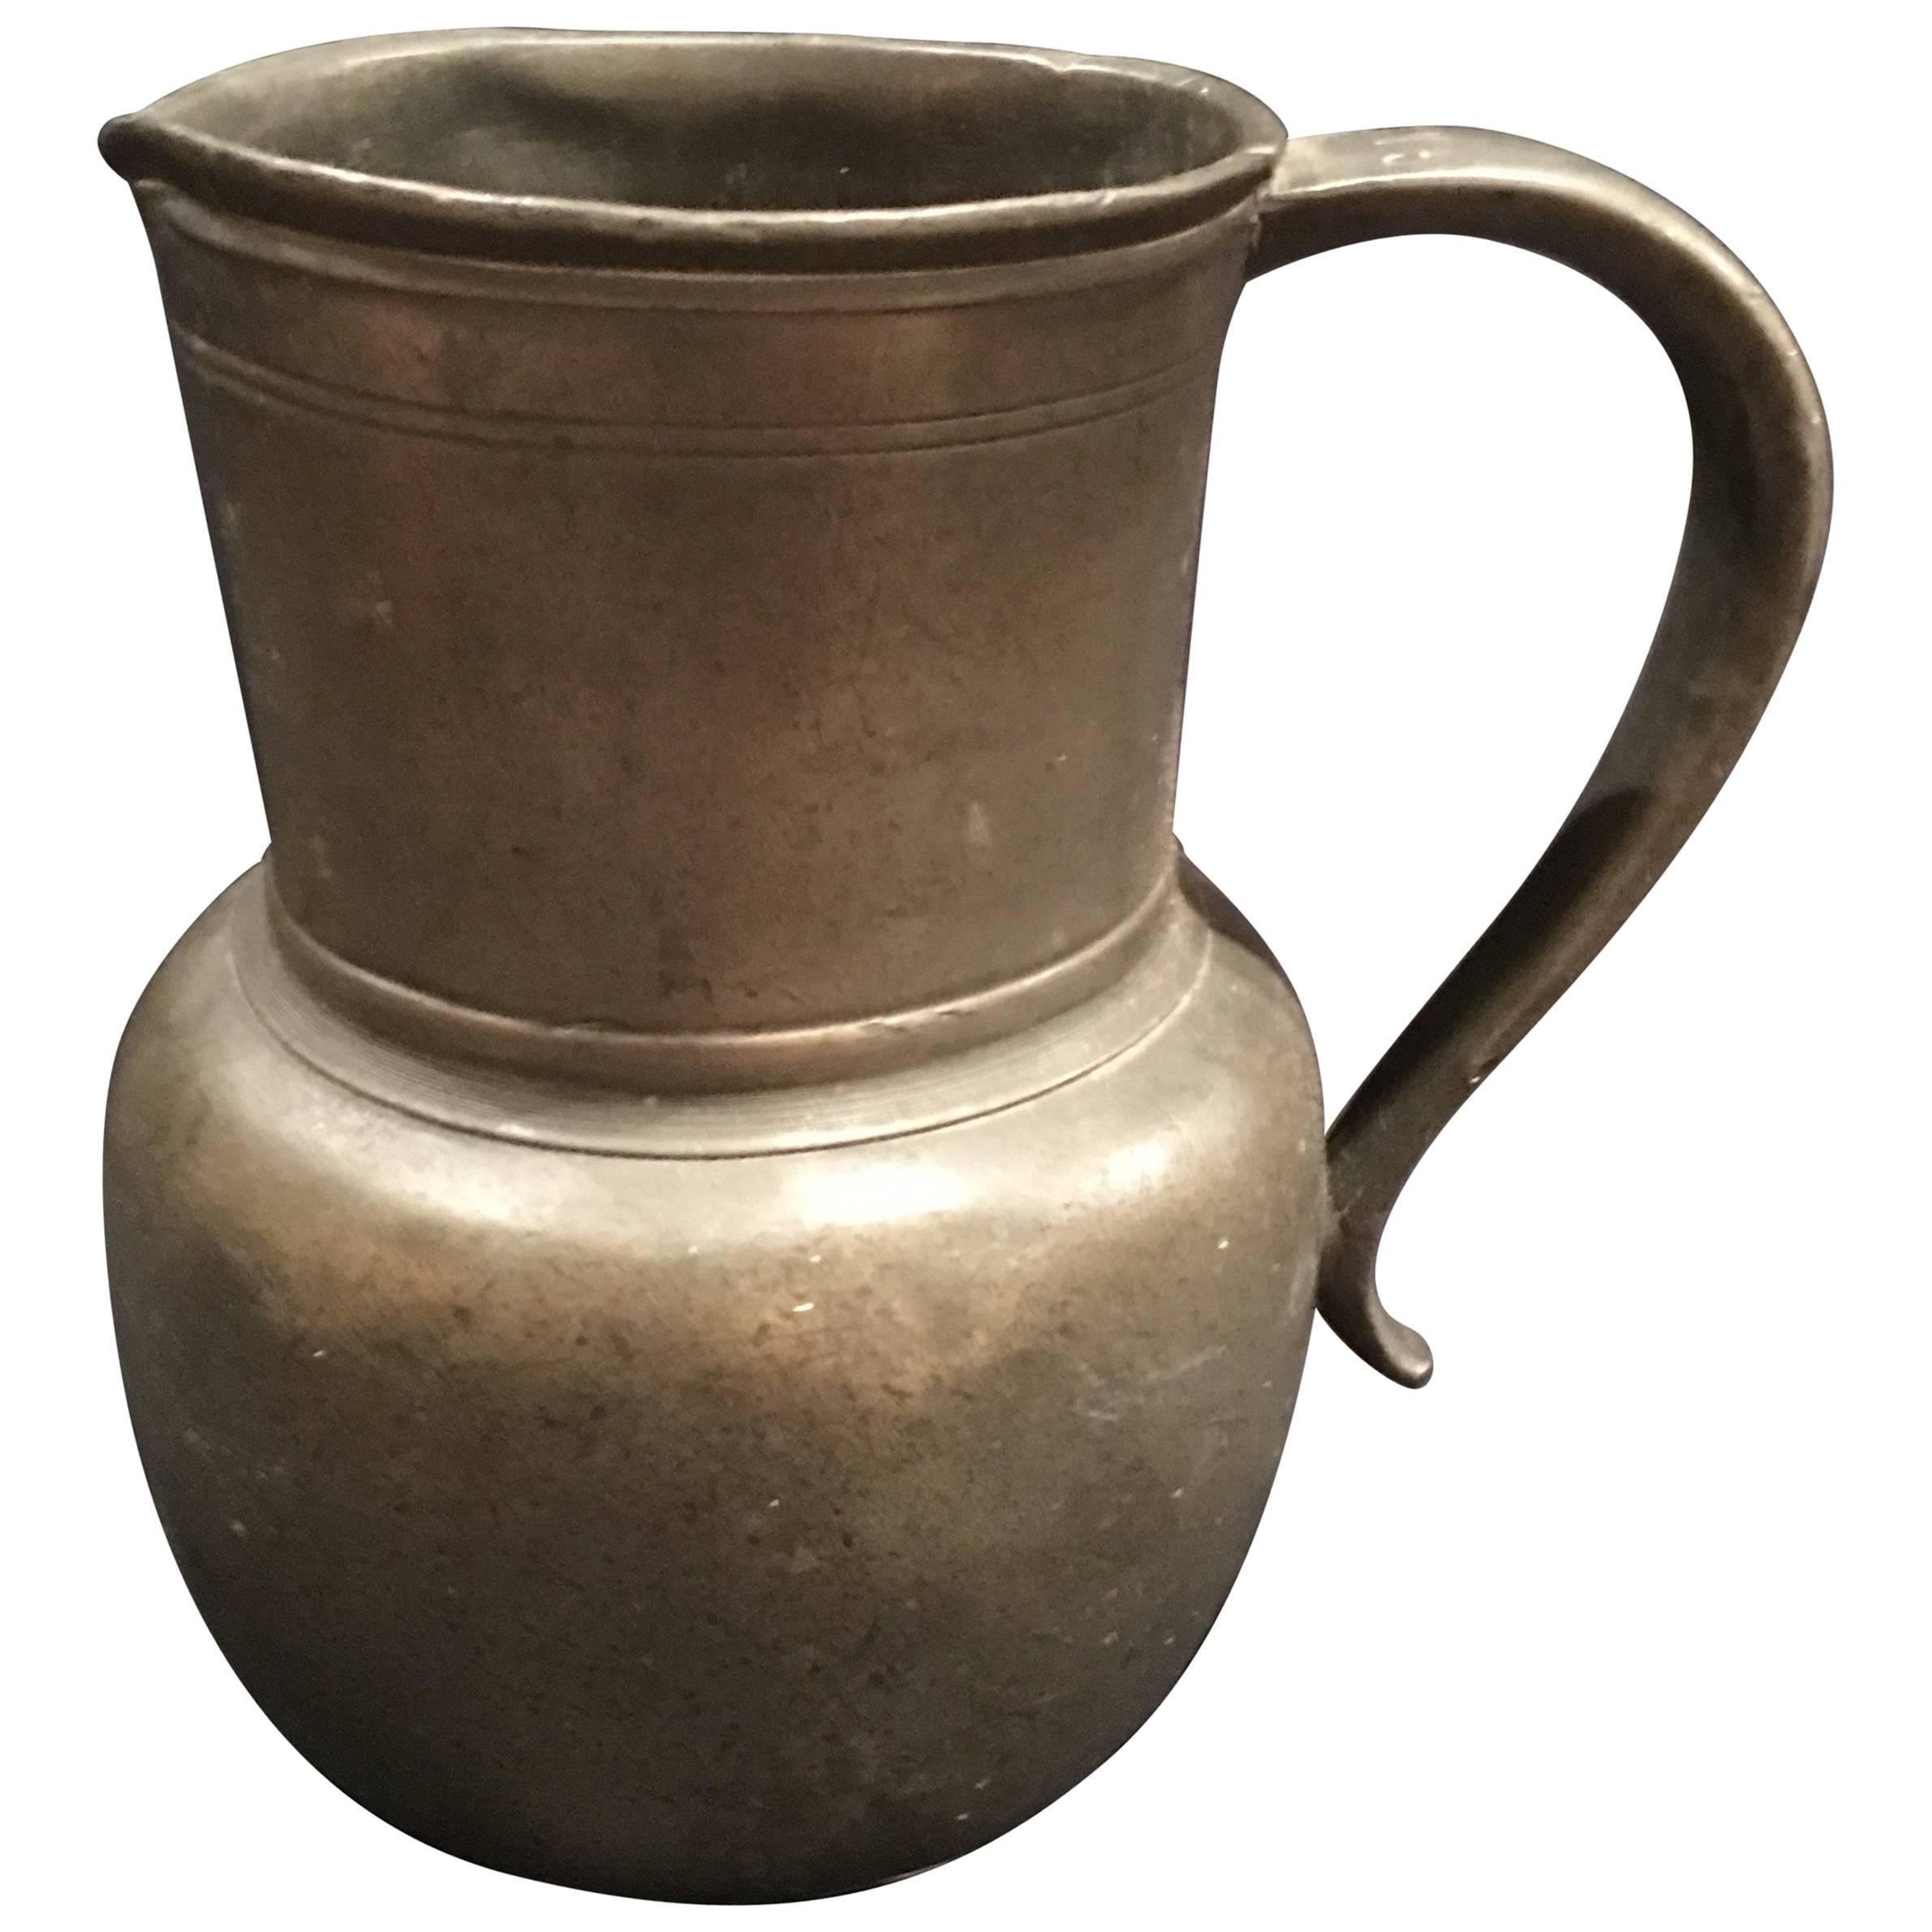 English Pewter Jug or Pitcher with a Handle, 19th Century